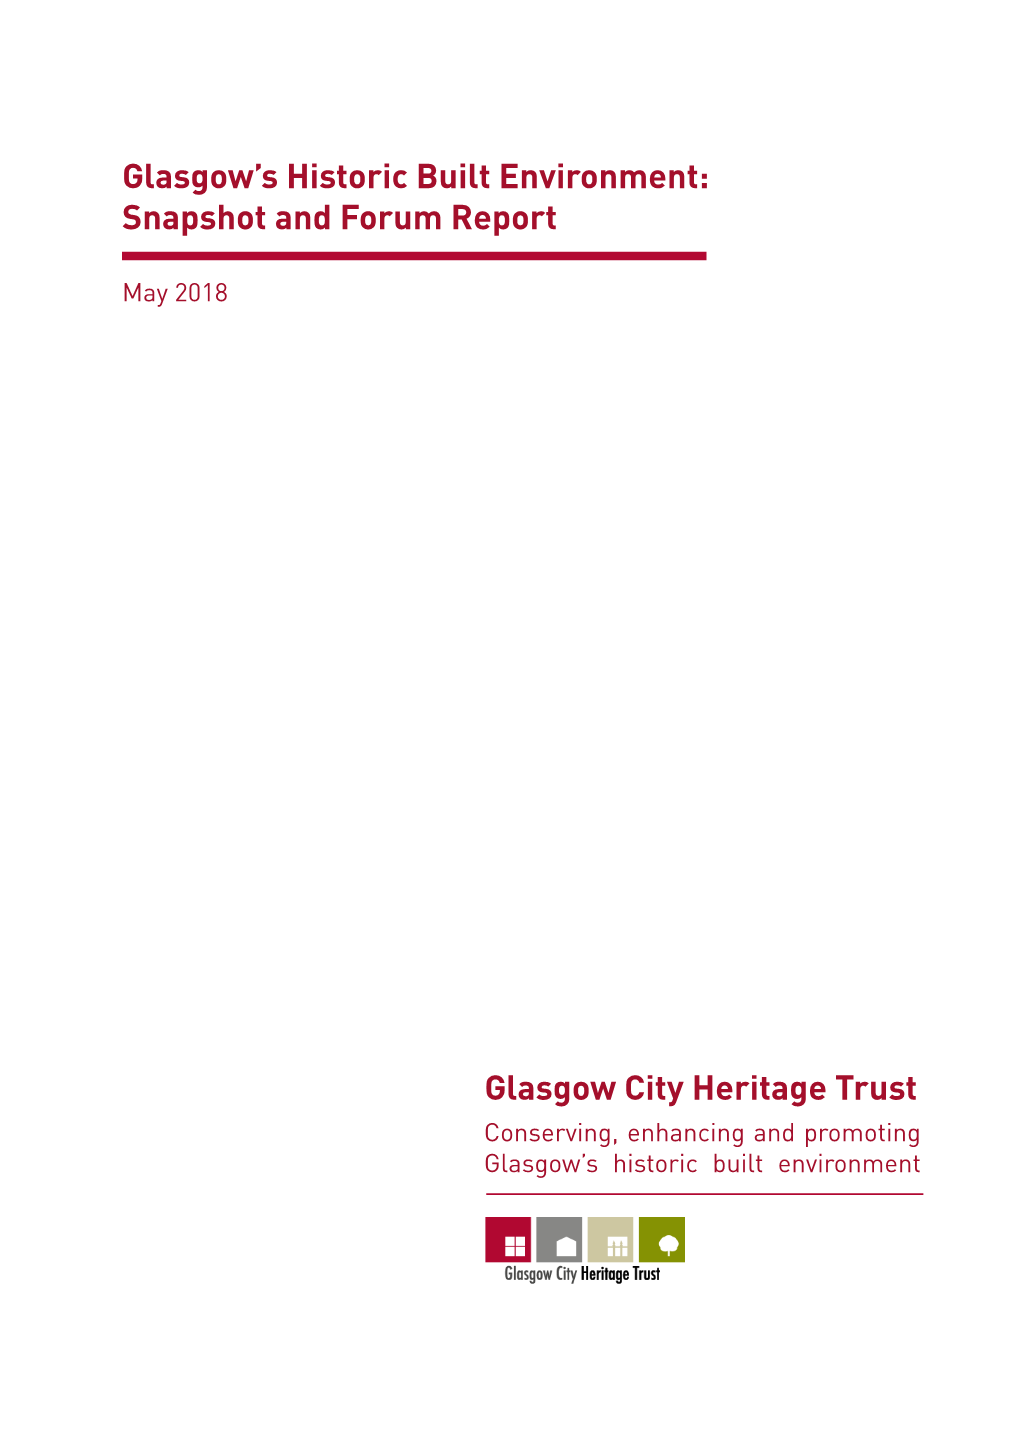 Glasgow's Historic Built Environment: Snapshot and Forum Report